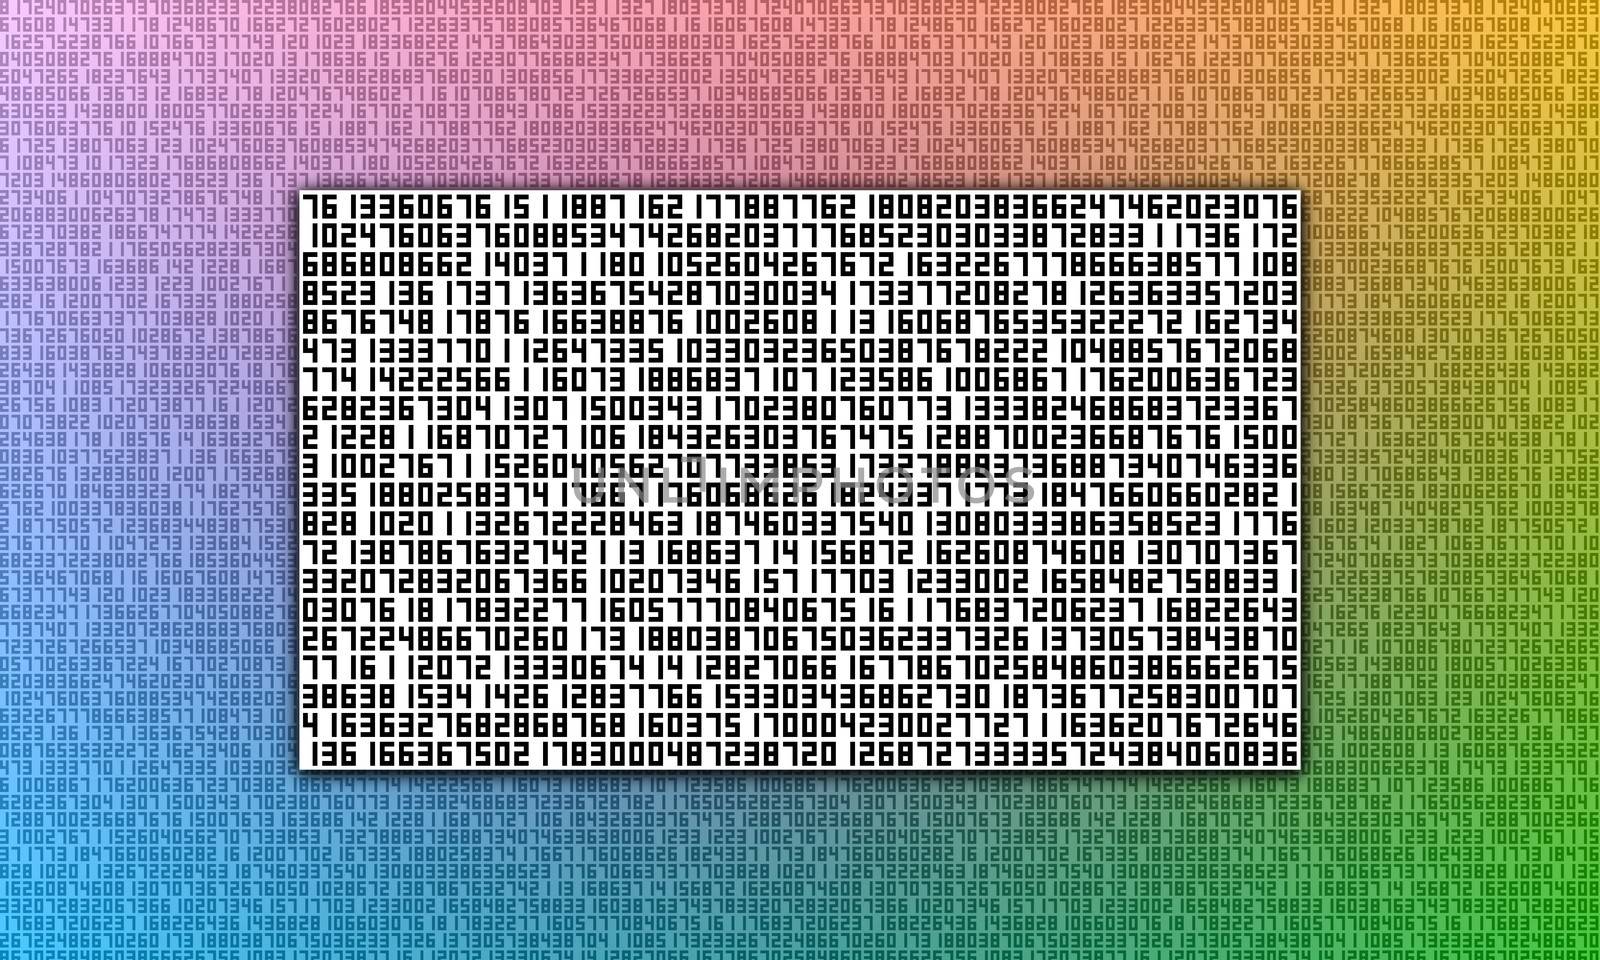 Illustration of a horizontal rectangle containing numbers over a colorful number filled background